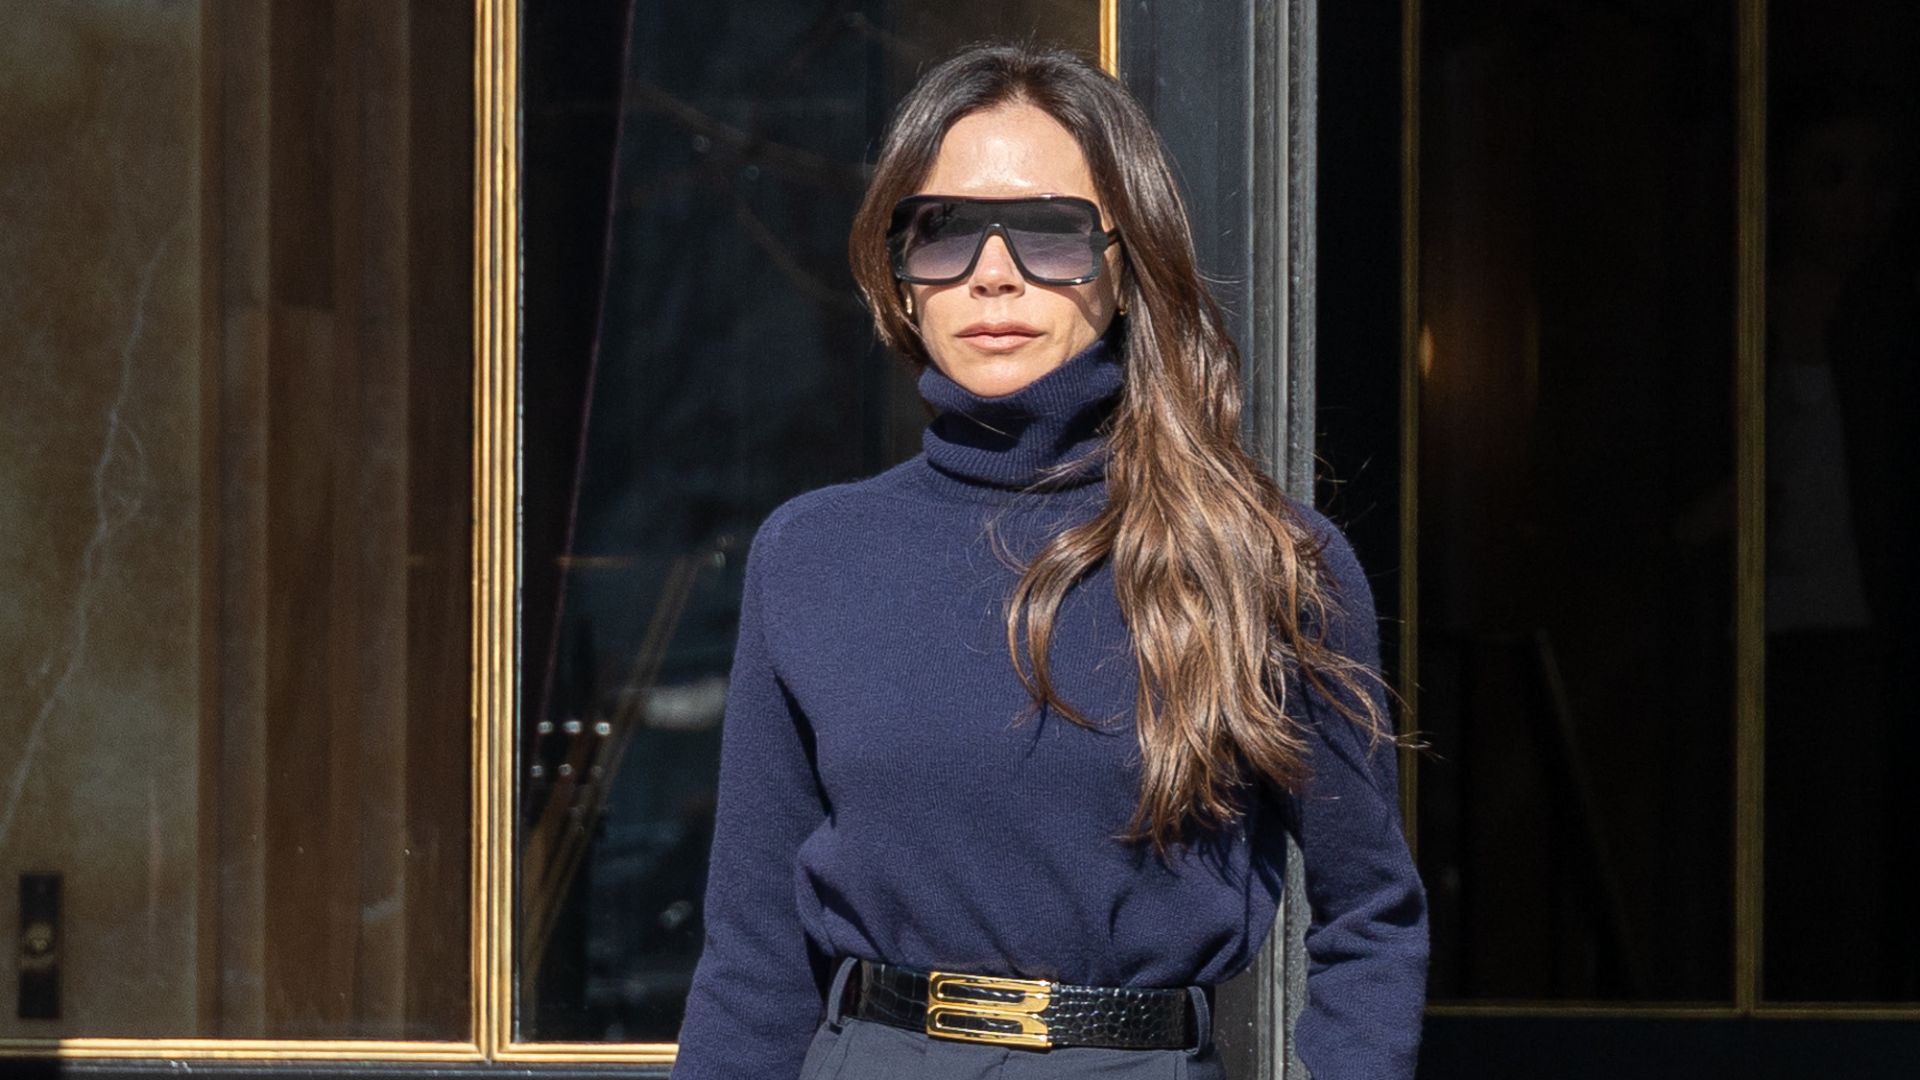 Victoria Beckham's fans noticed that she reserved a seat for her purse ...